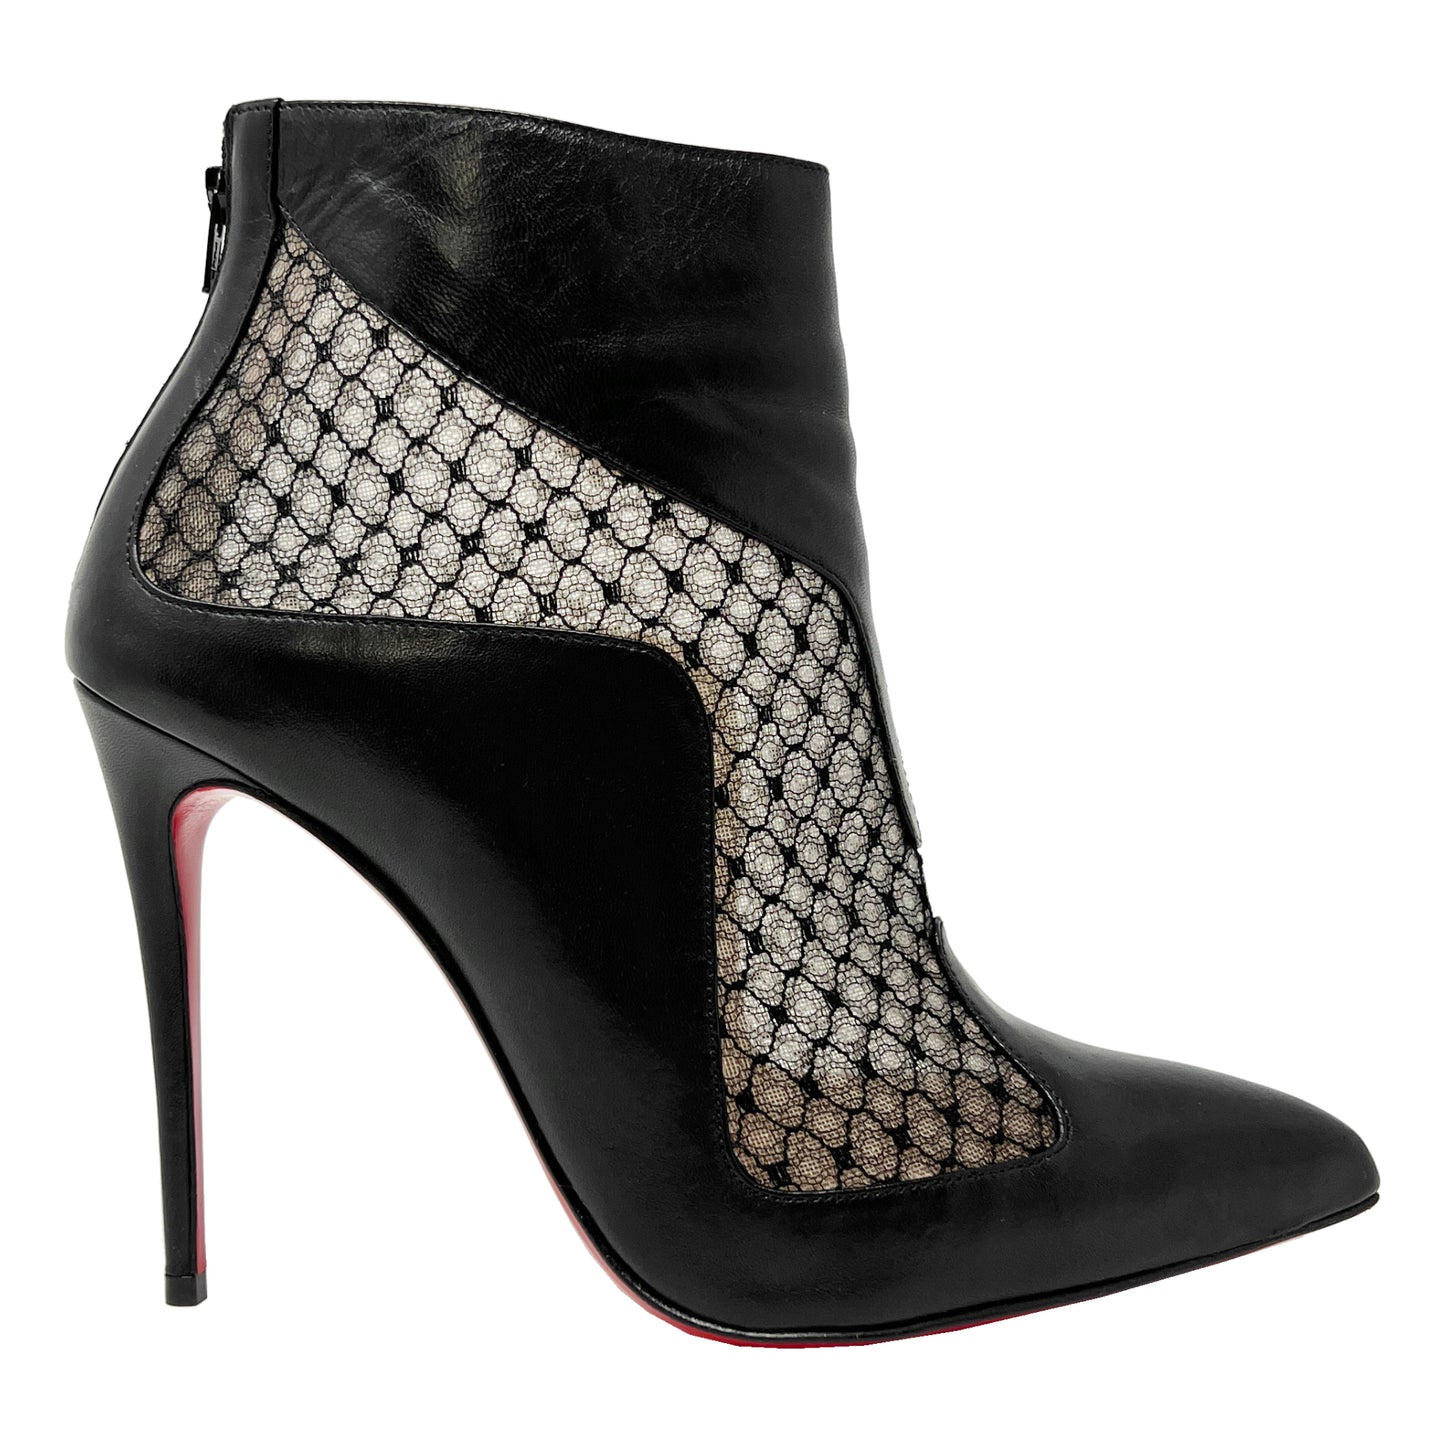 Christian Louboutin Papilloboots Black Leather Lace Resille Heels Ankle Boots Size EU 37